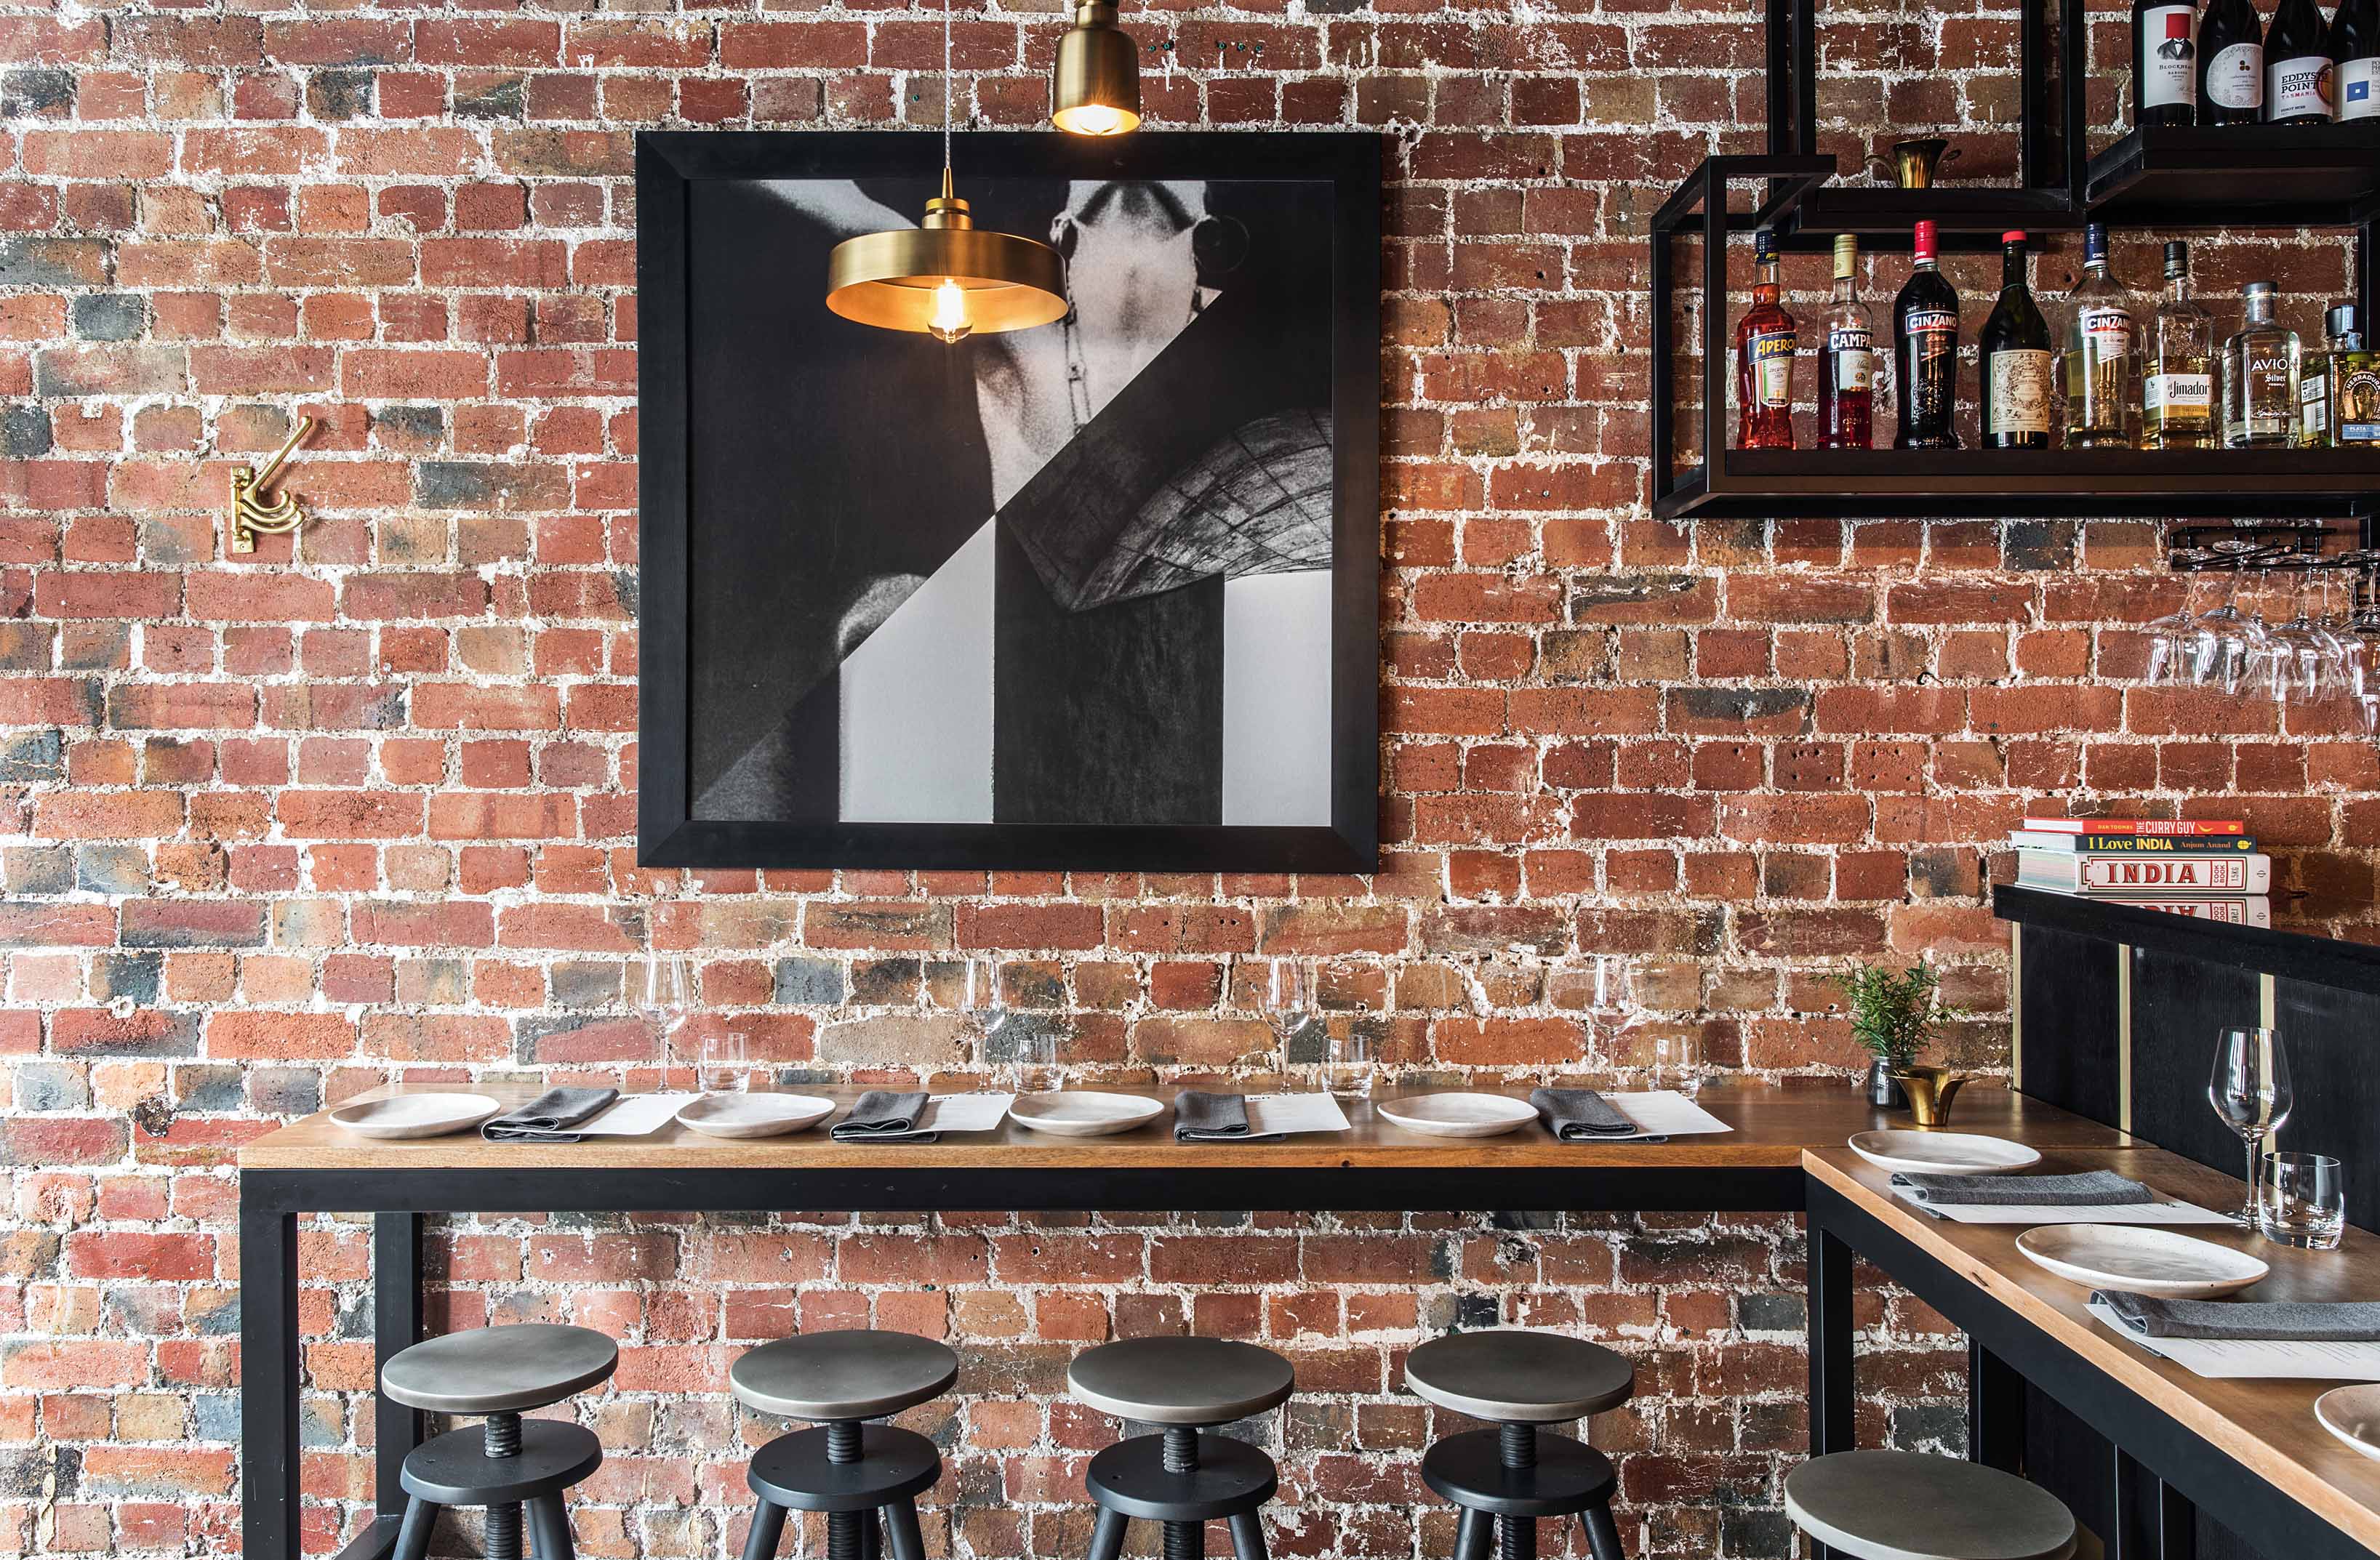 High hardwood timber tables line the exposed brick wall